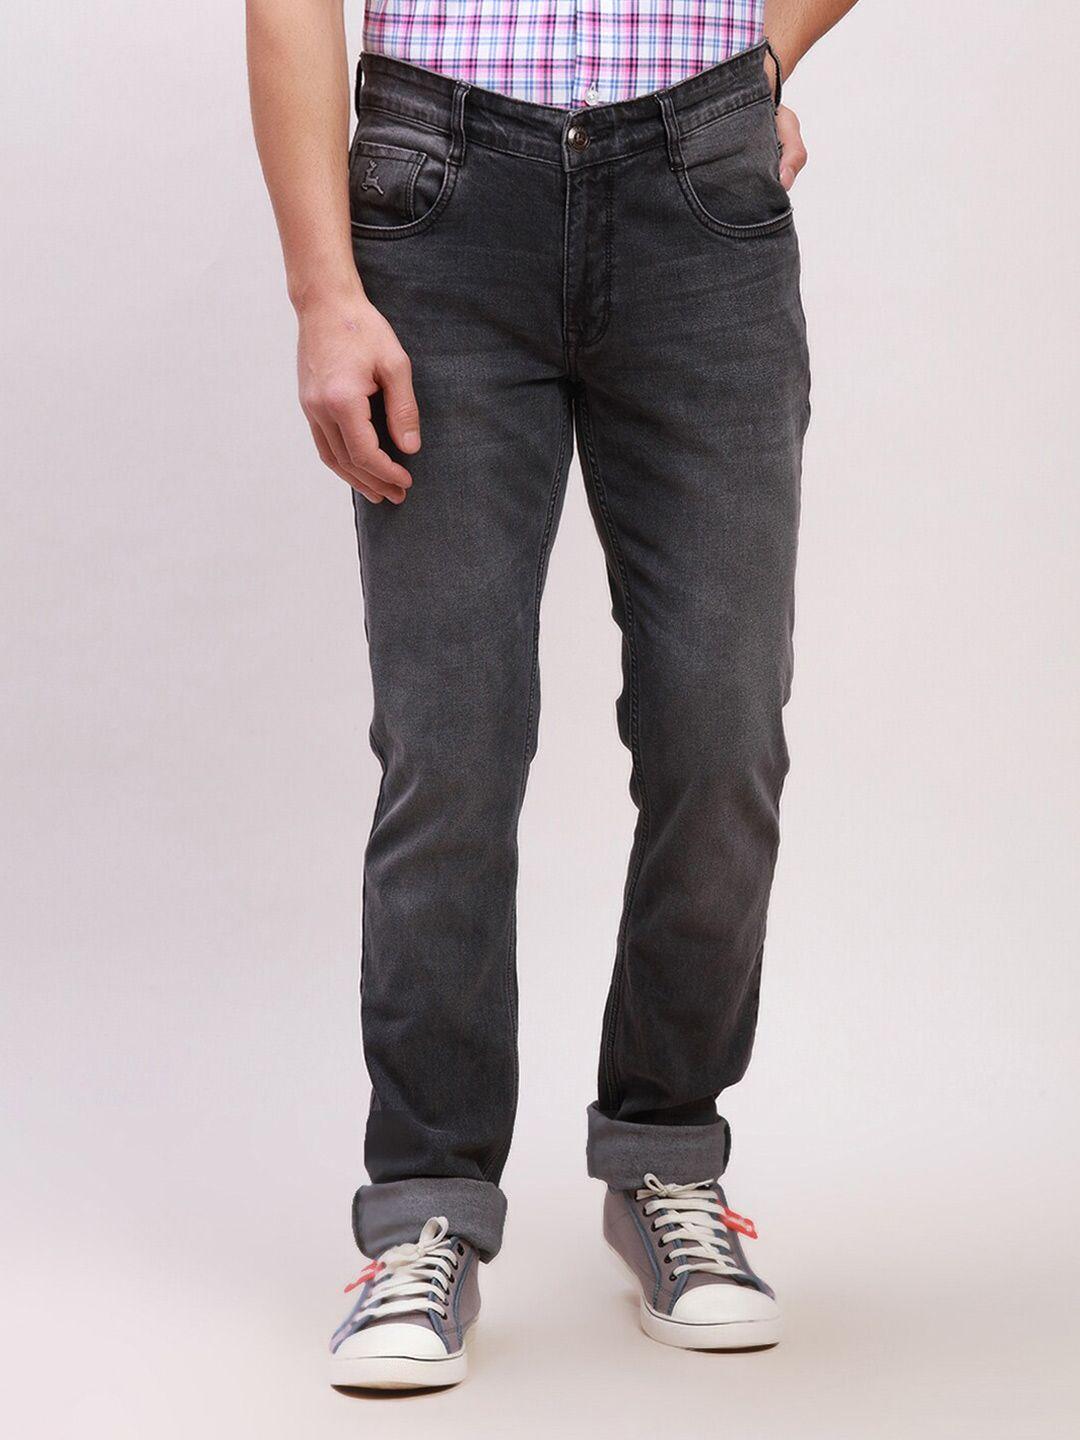 parx-men-tapered-fit-low-rise-heavy-fade-cotton-jeans